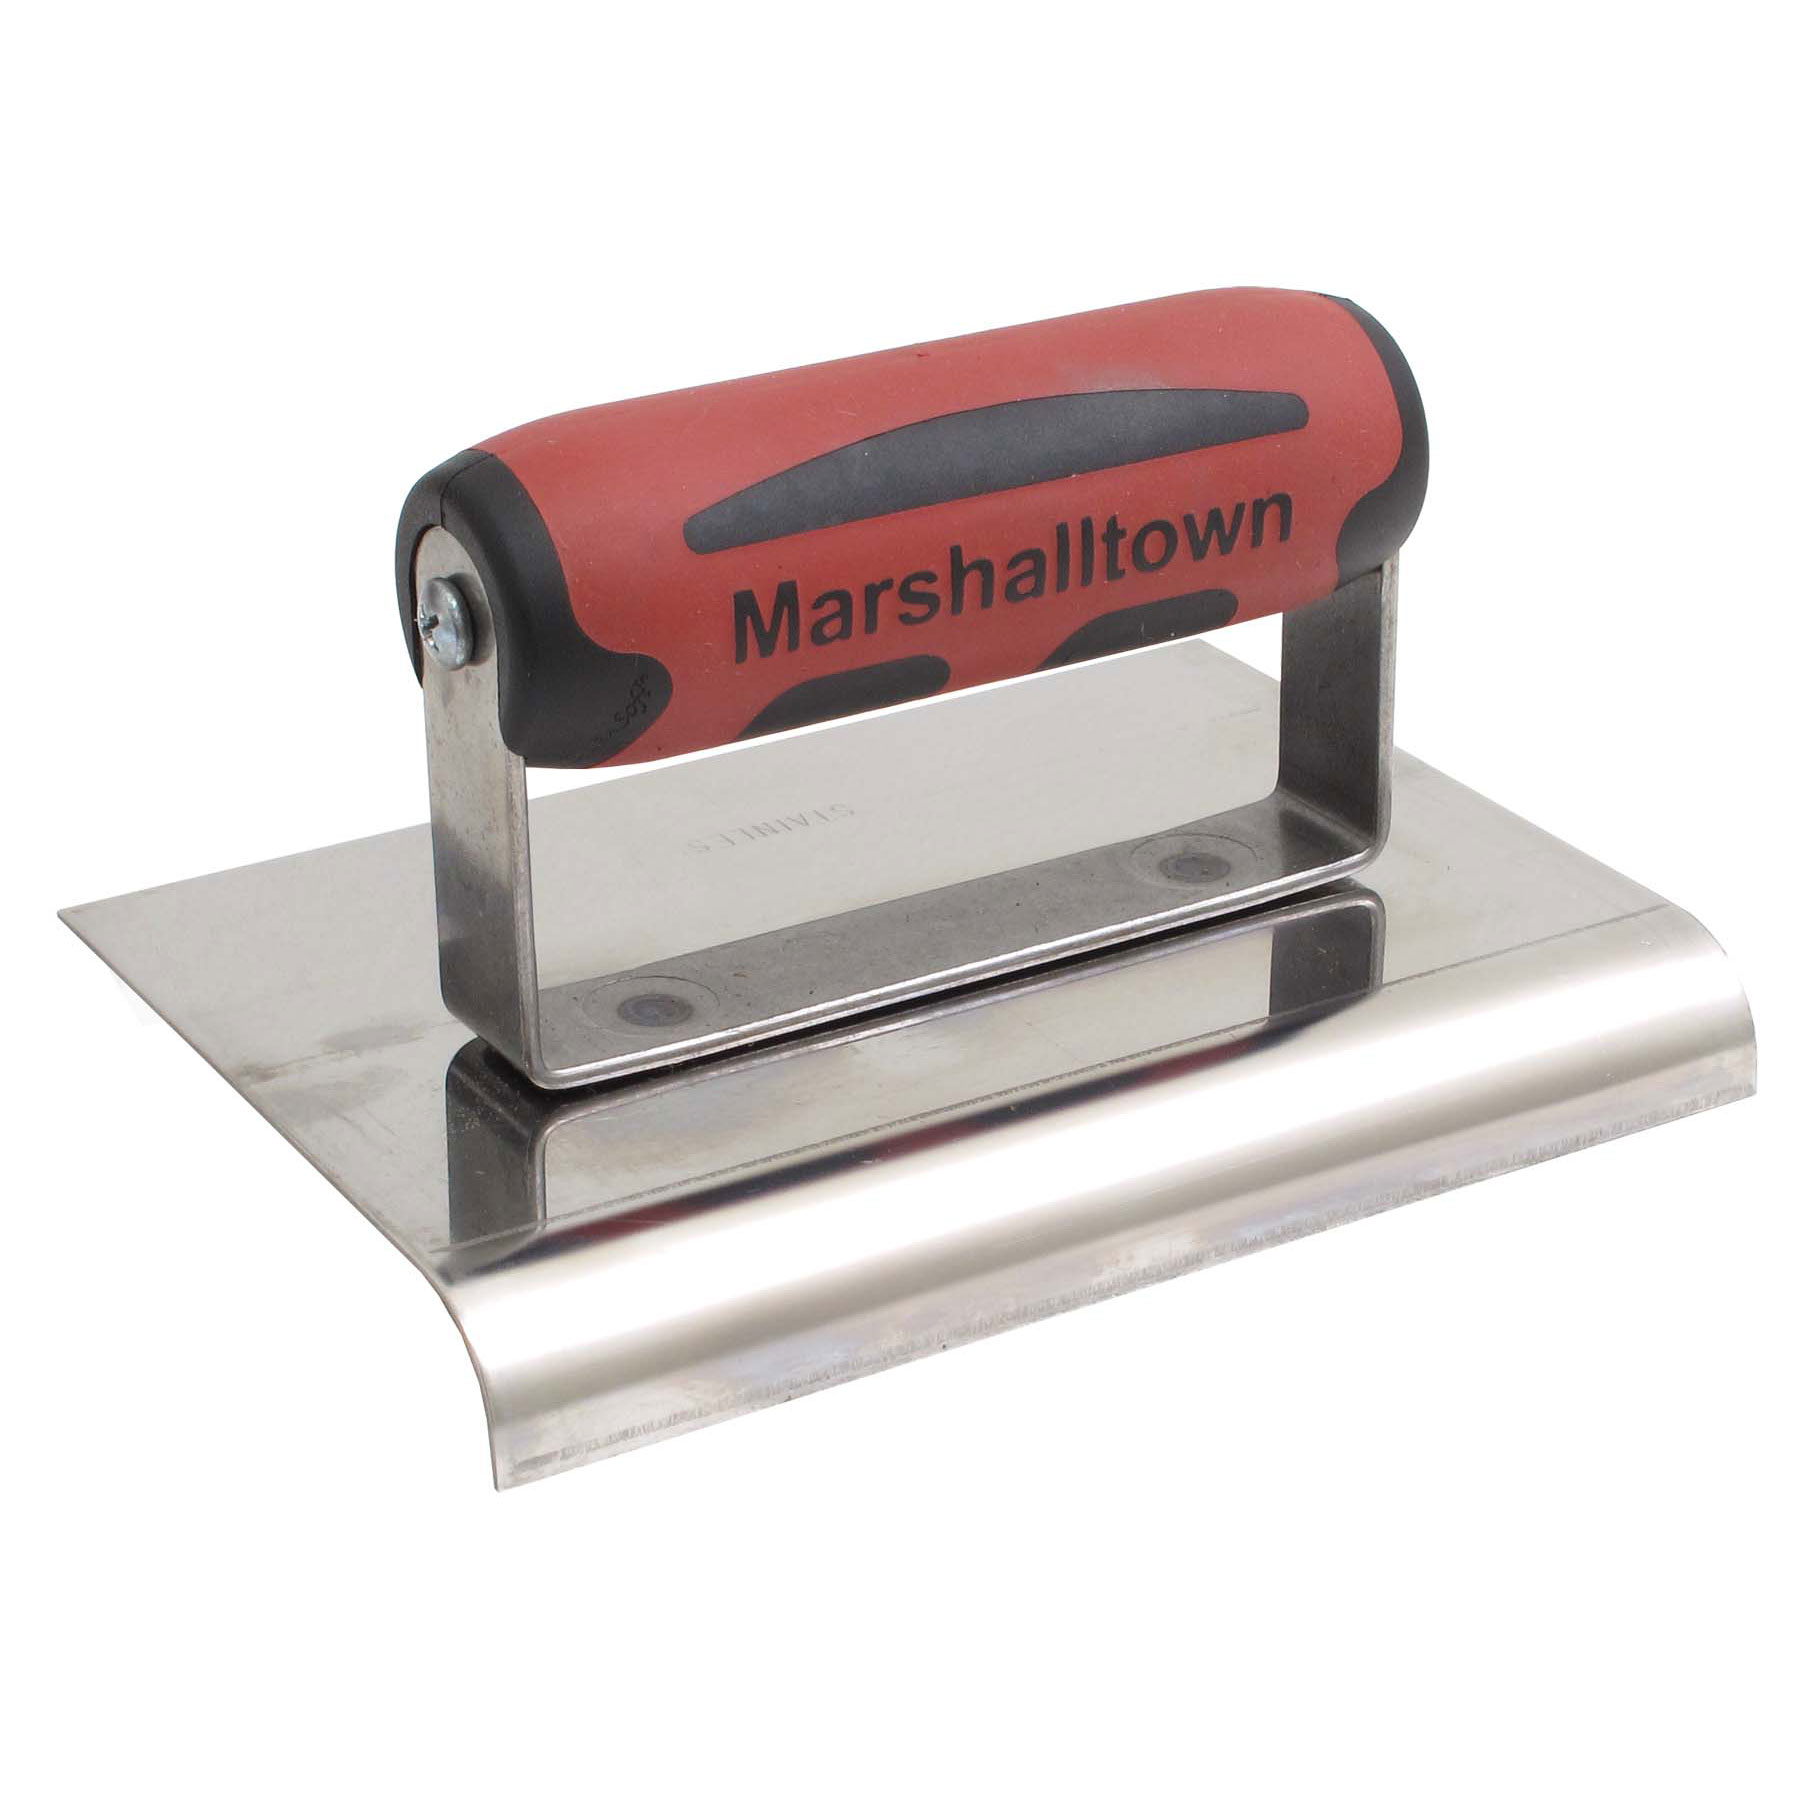 Marshalltown - QLT CE509S 6in. x 4in. Stainless Steel Edger; 1/2R, 5/8L-Wood Handle MAT-CE509S